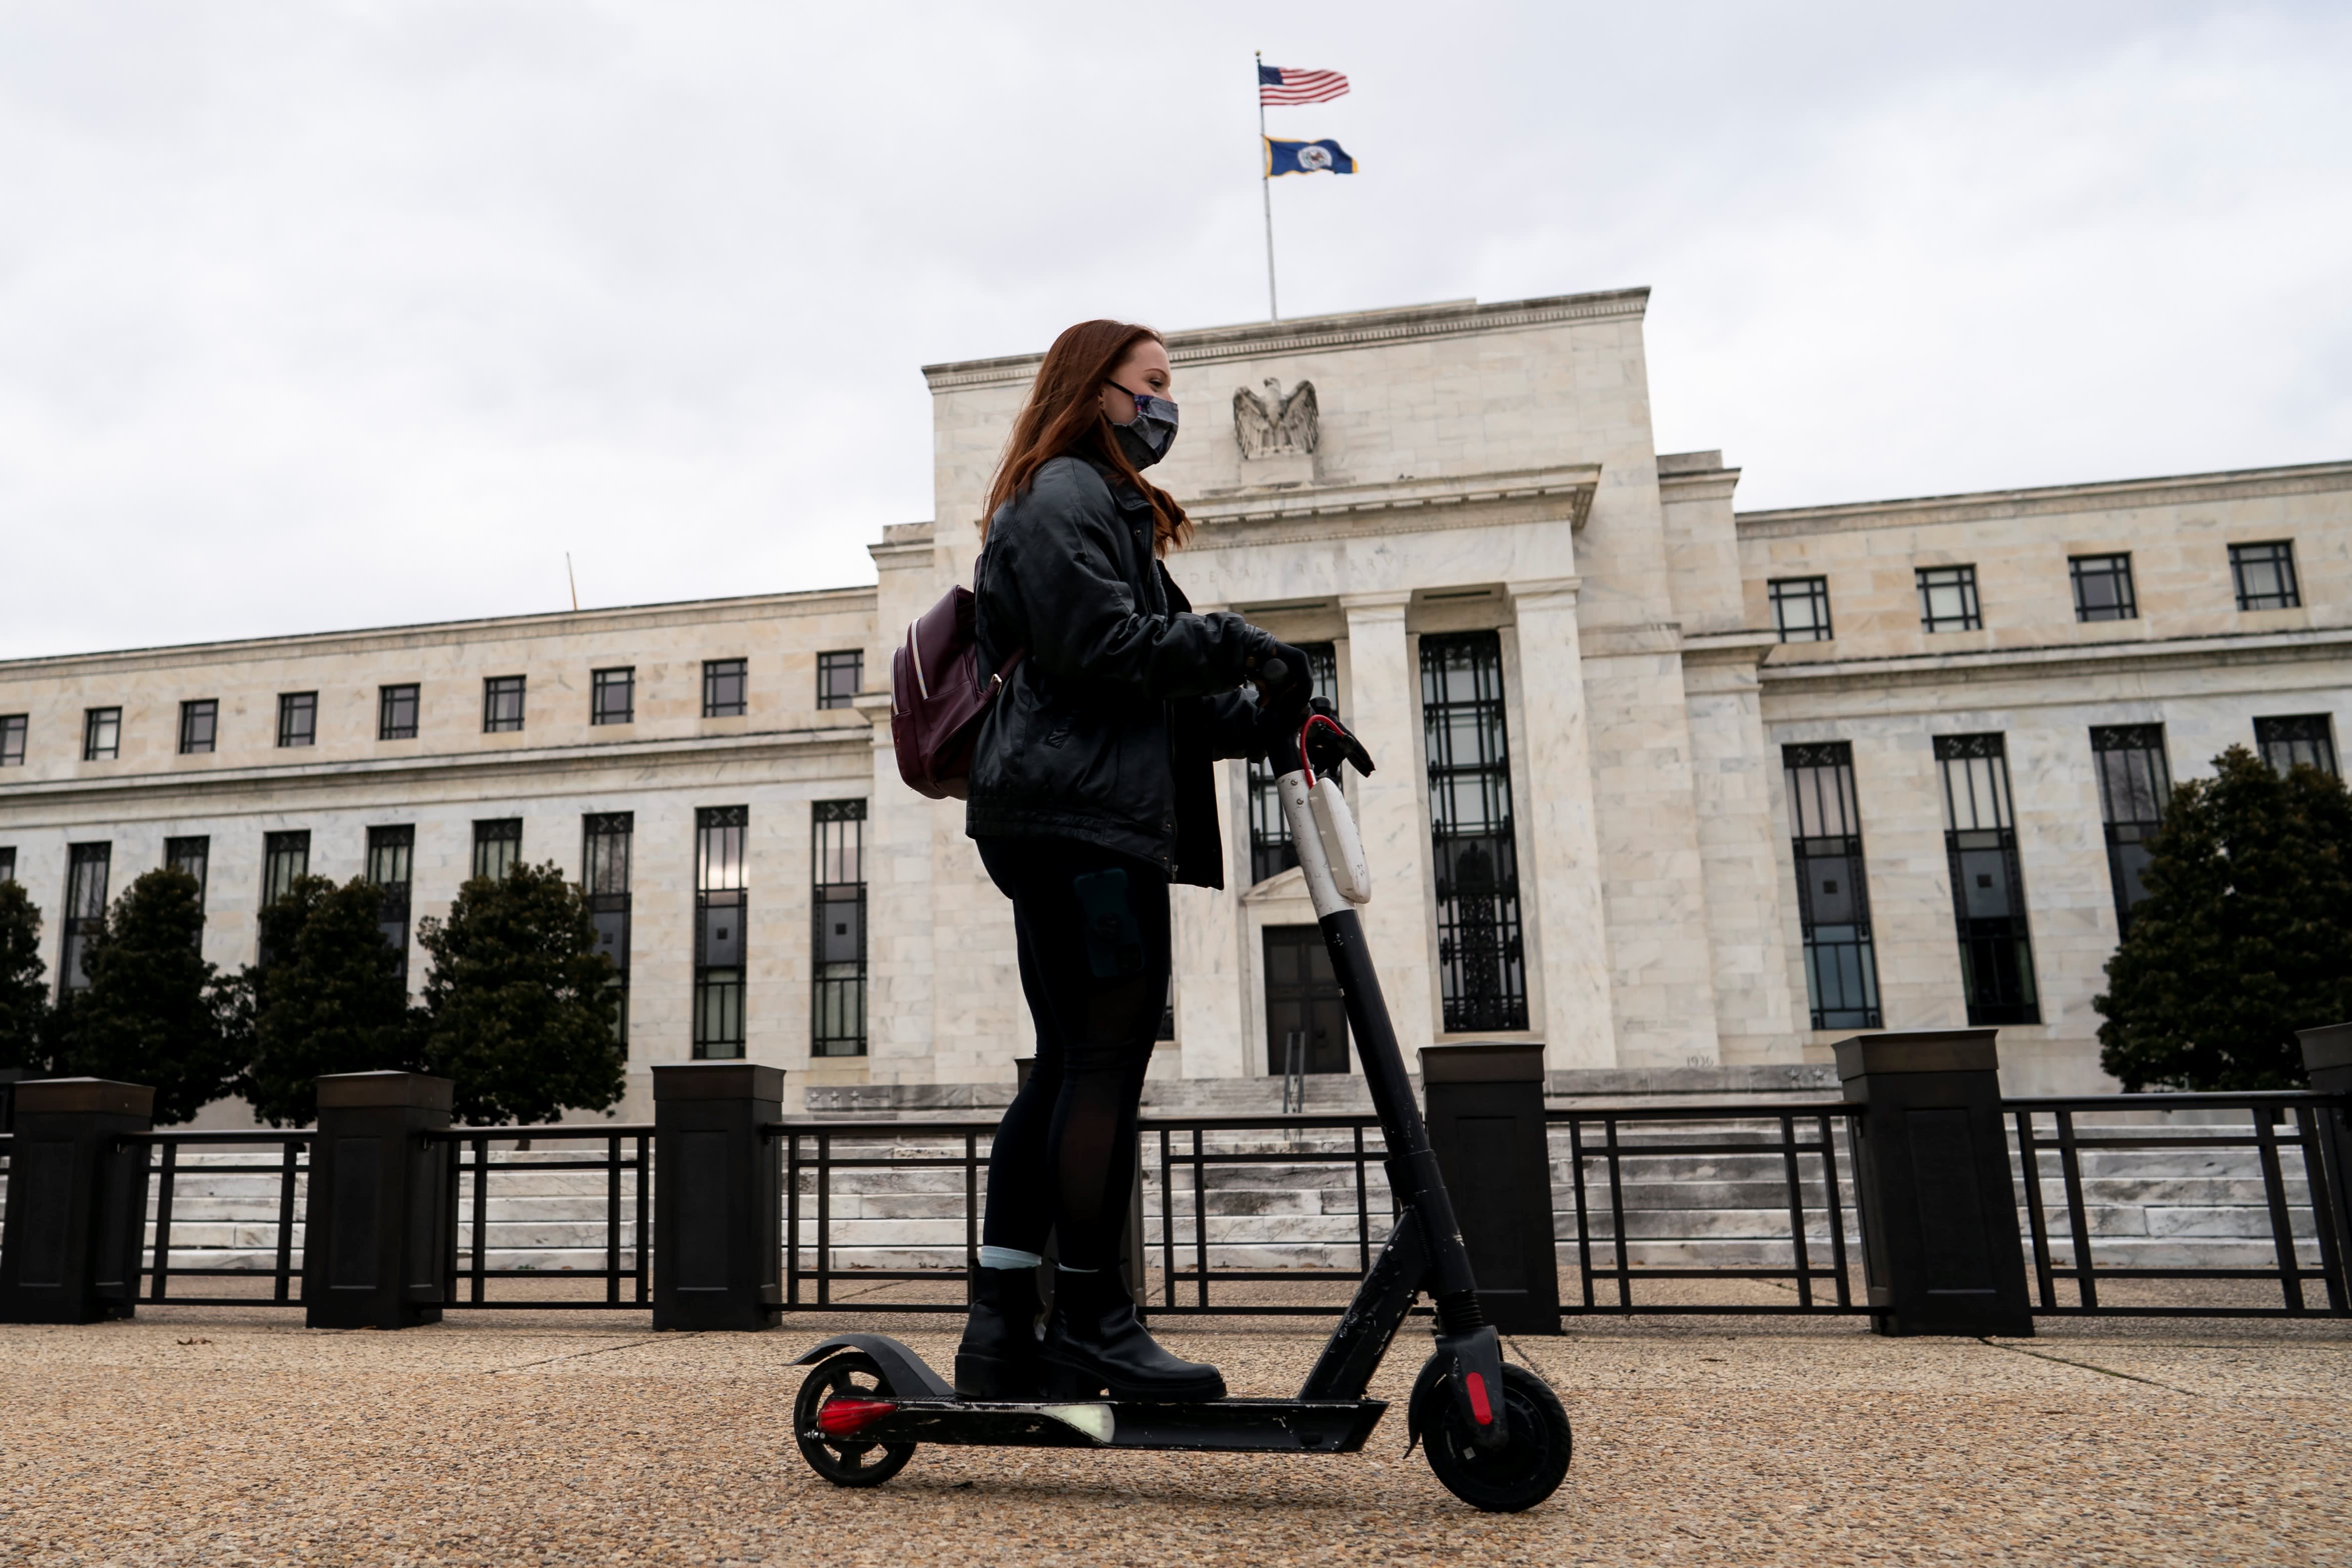 The Fed is ‘overwhelmingly’ white and male and needs to change, study says